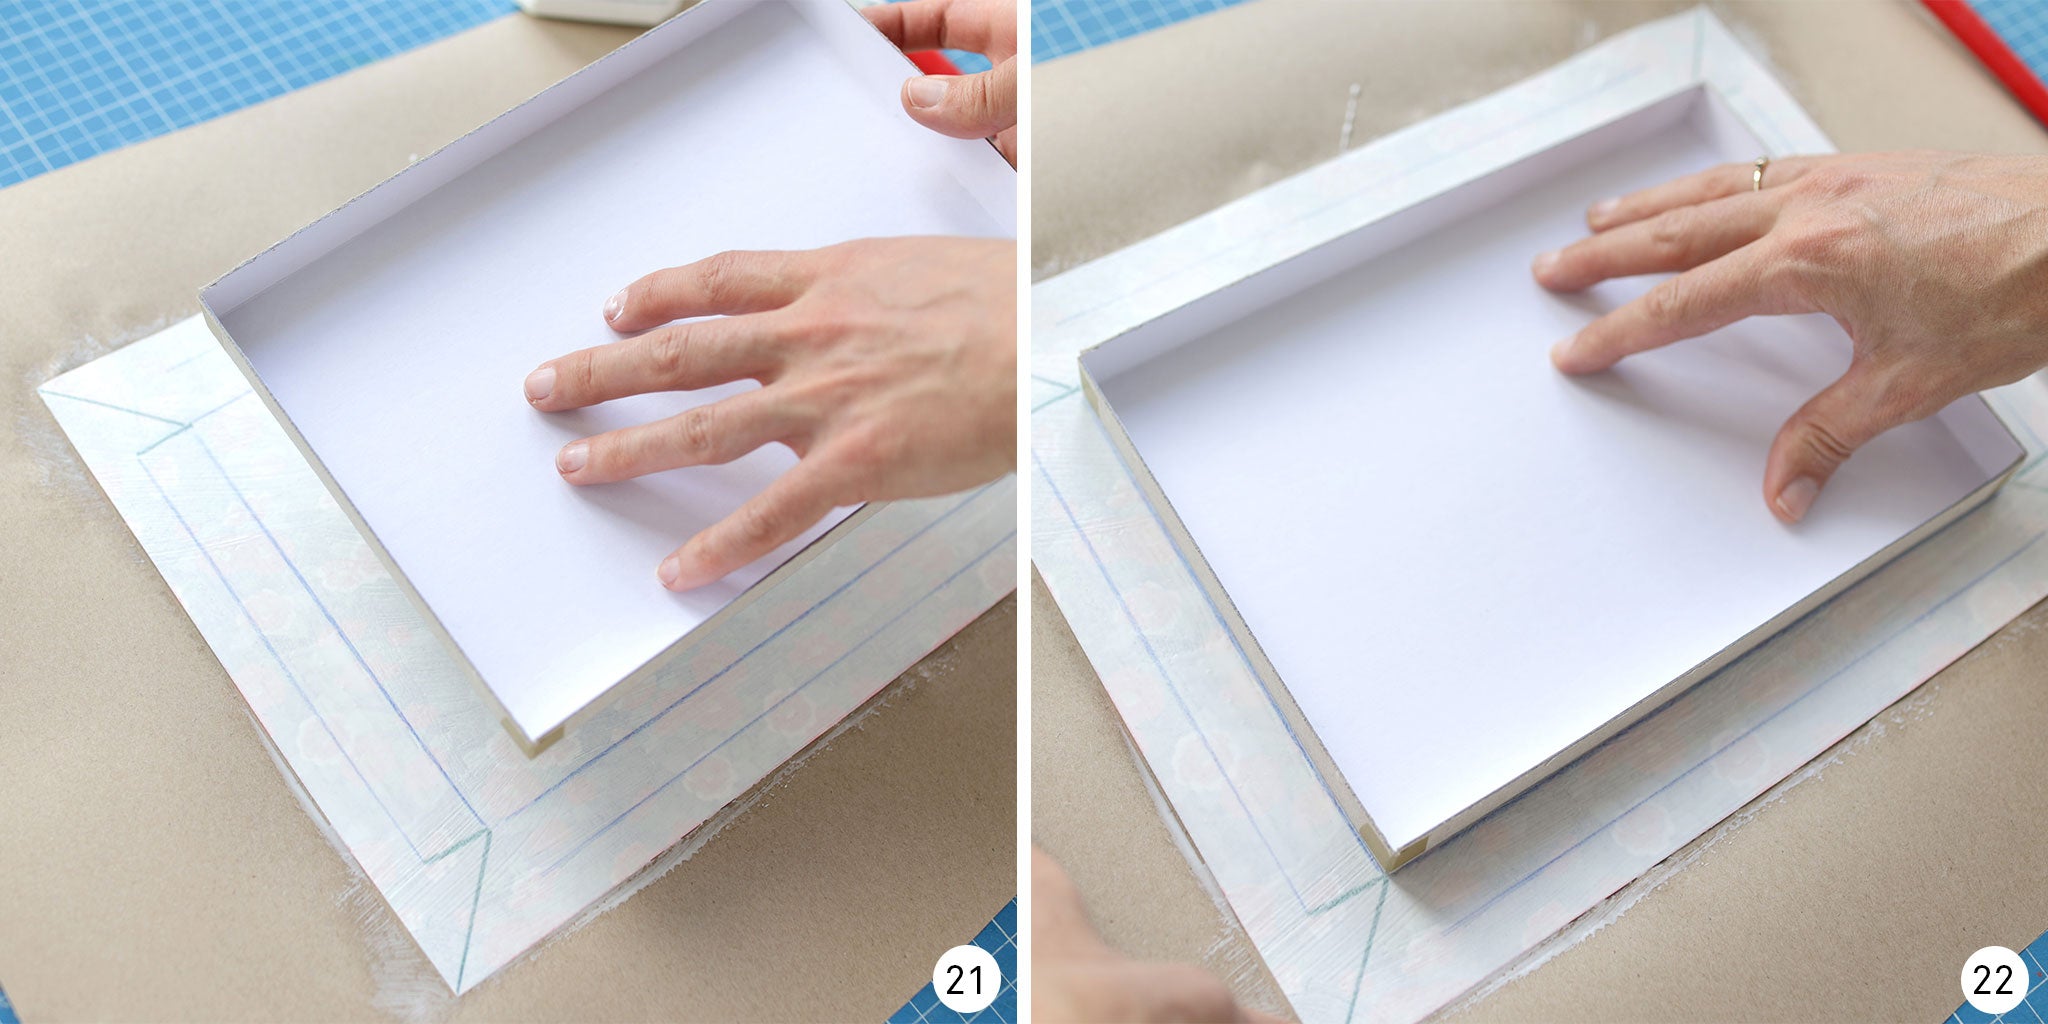 blog-article-tutorial-storage-box-assemble-yourself-step-21-22